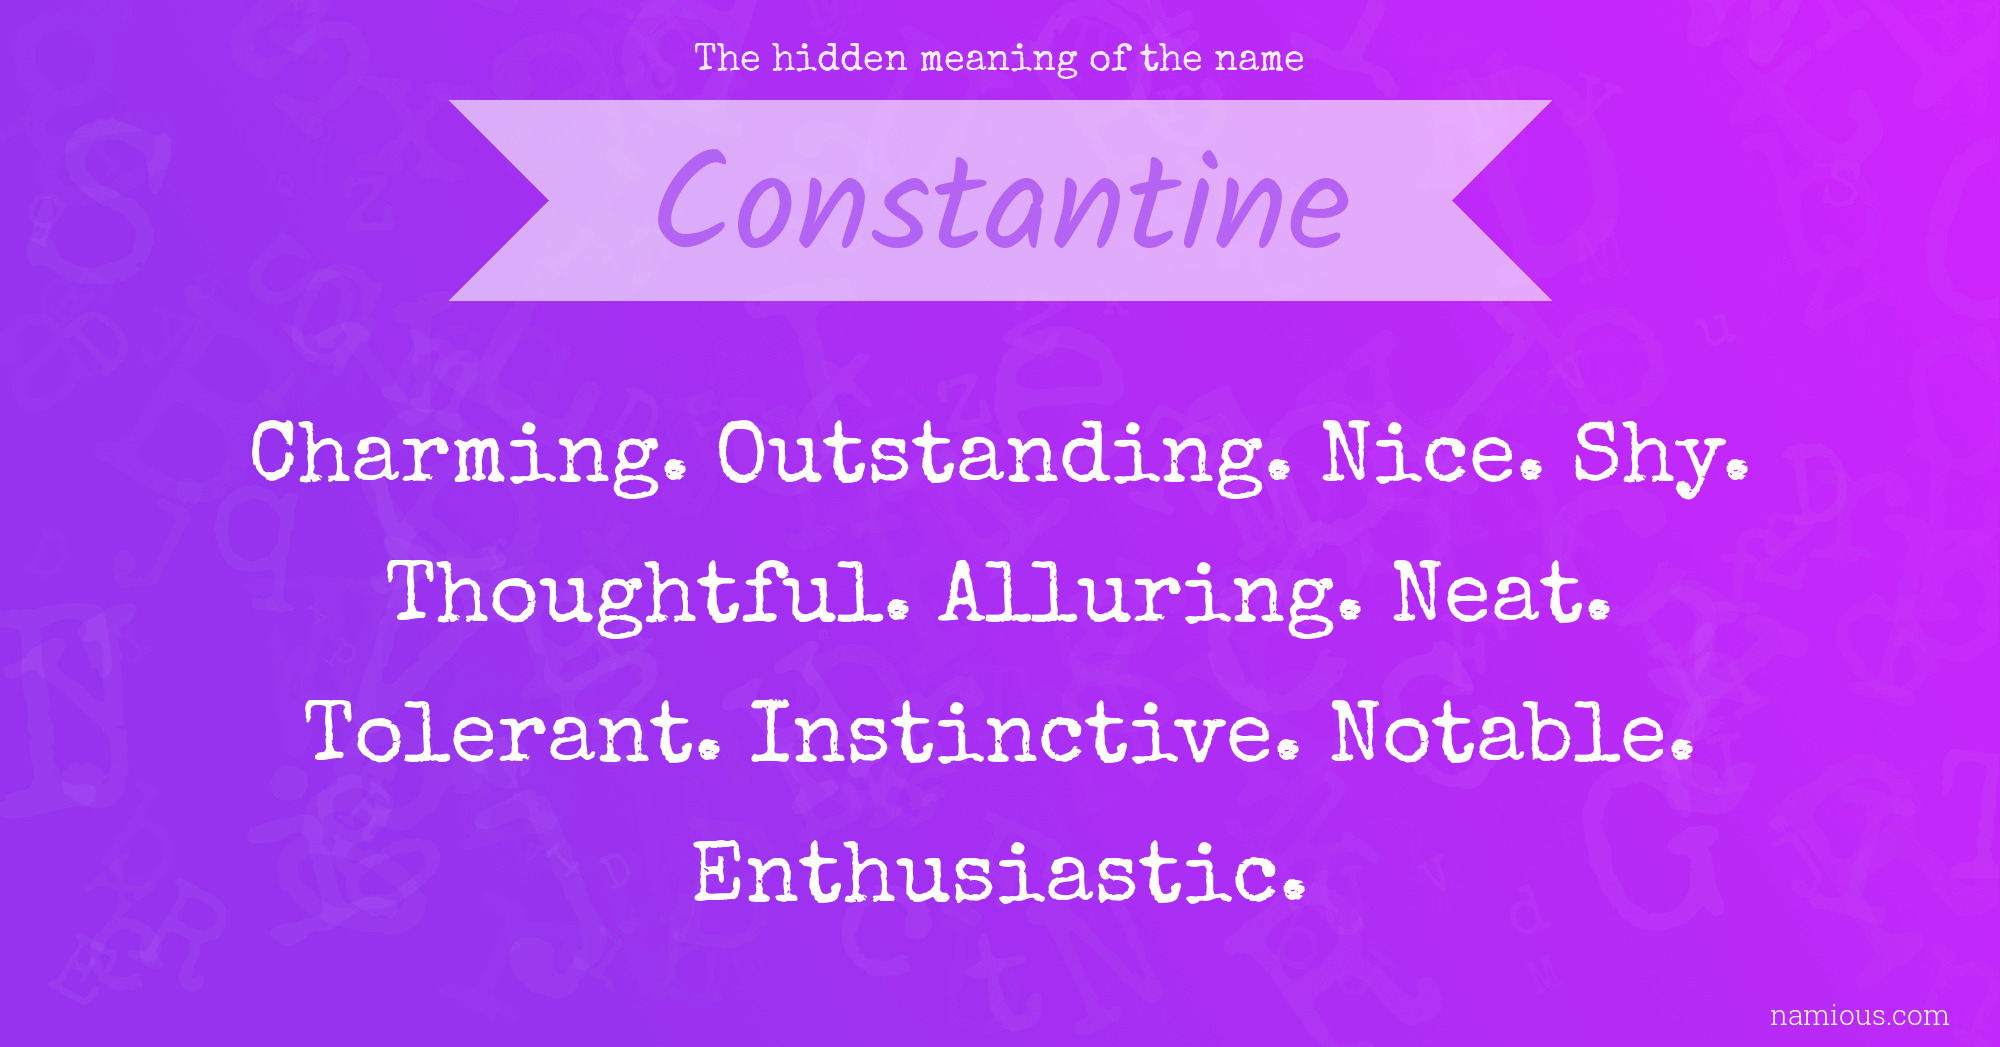 Meaning constantine Constantine Meaning,